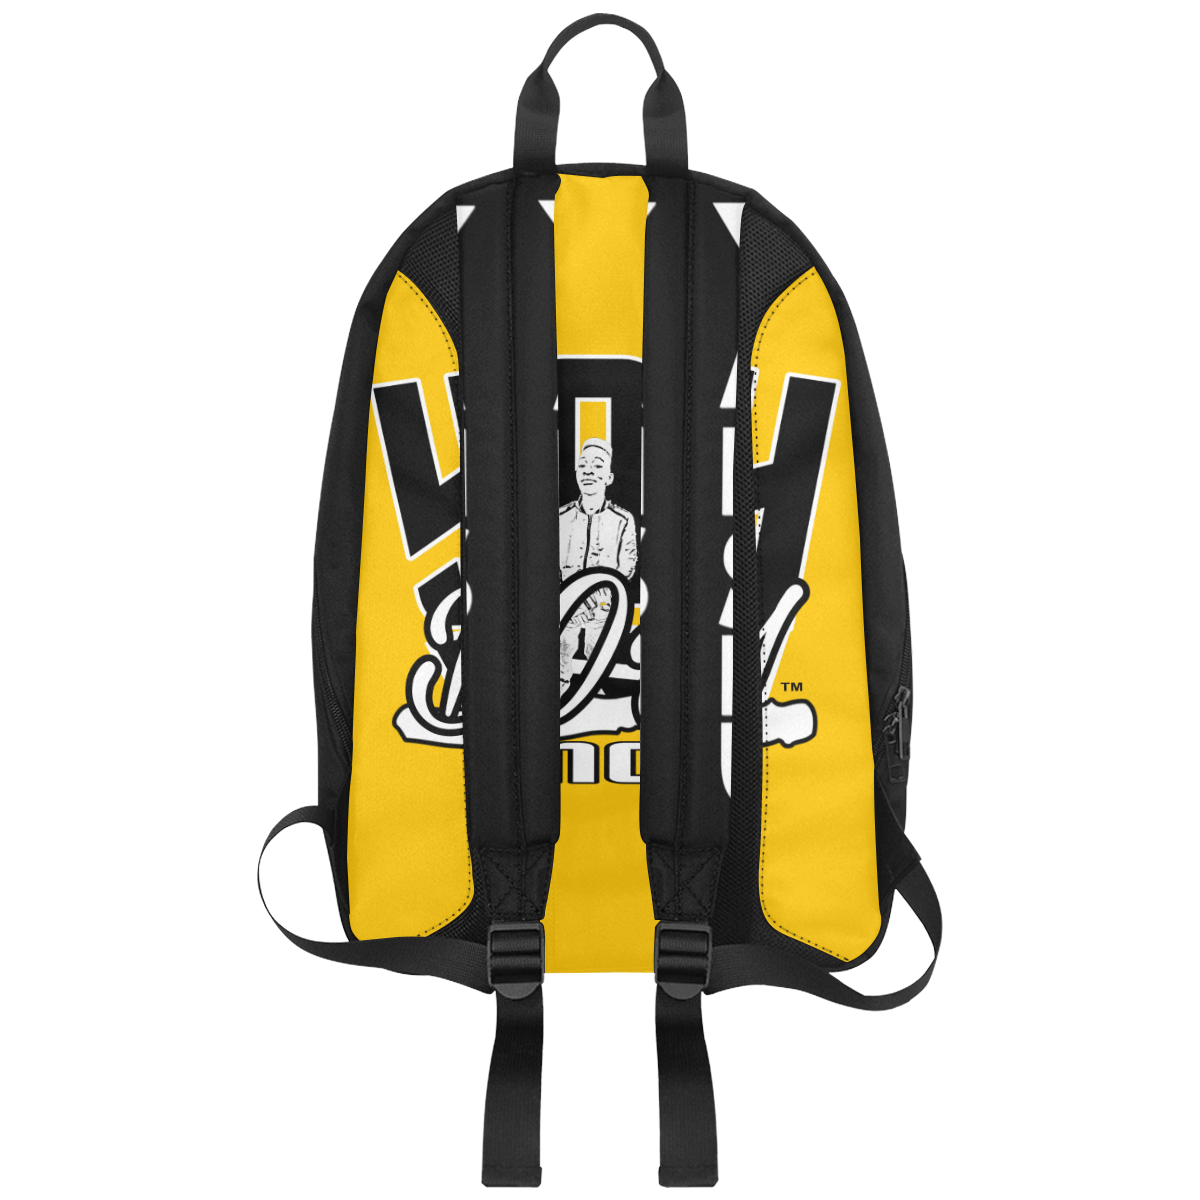 YahBoy Inc. Yellow Large Capacity Travel Backpack (Model 1691)